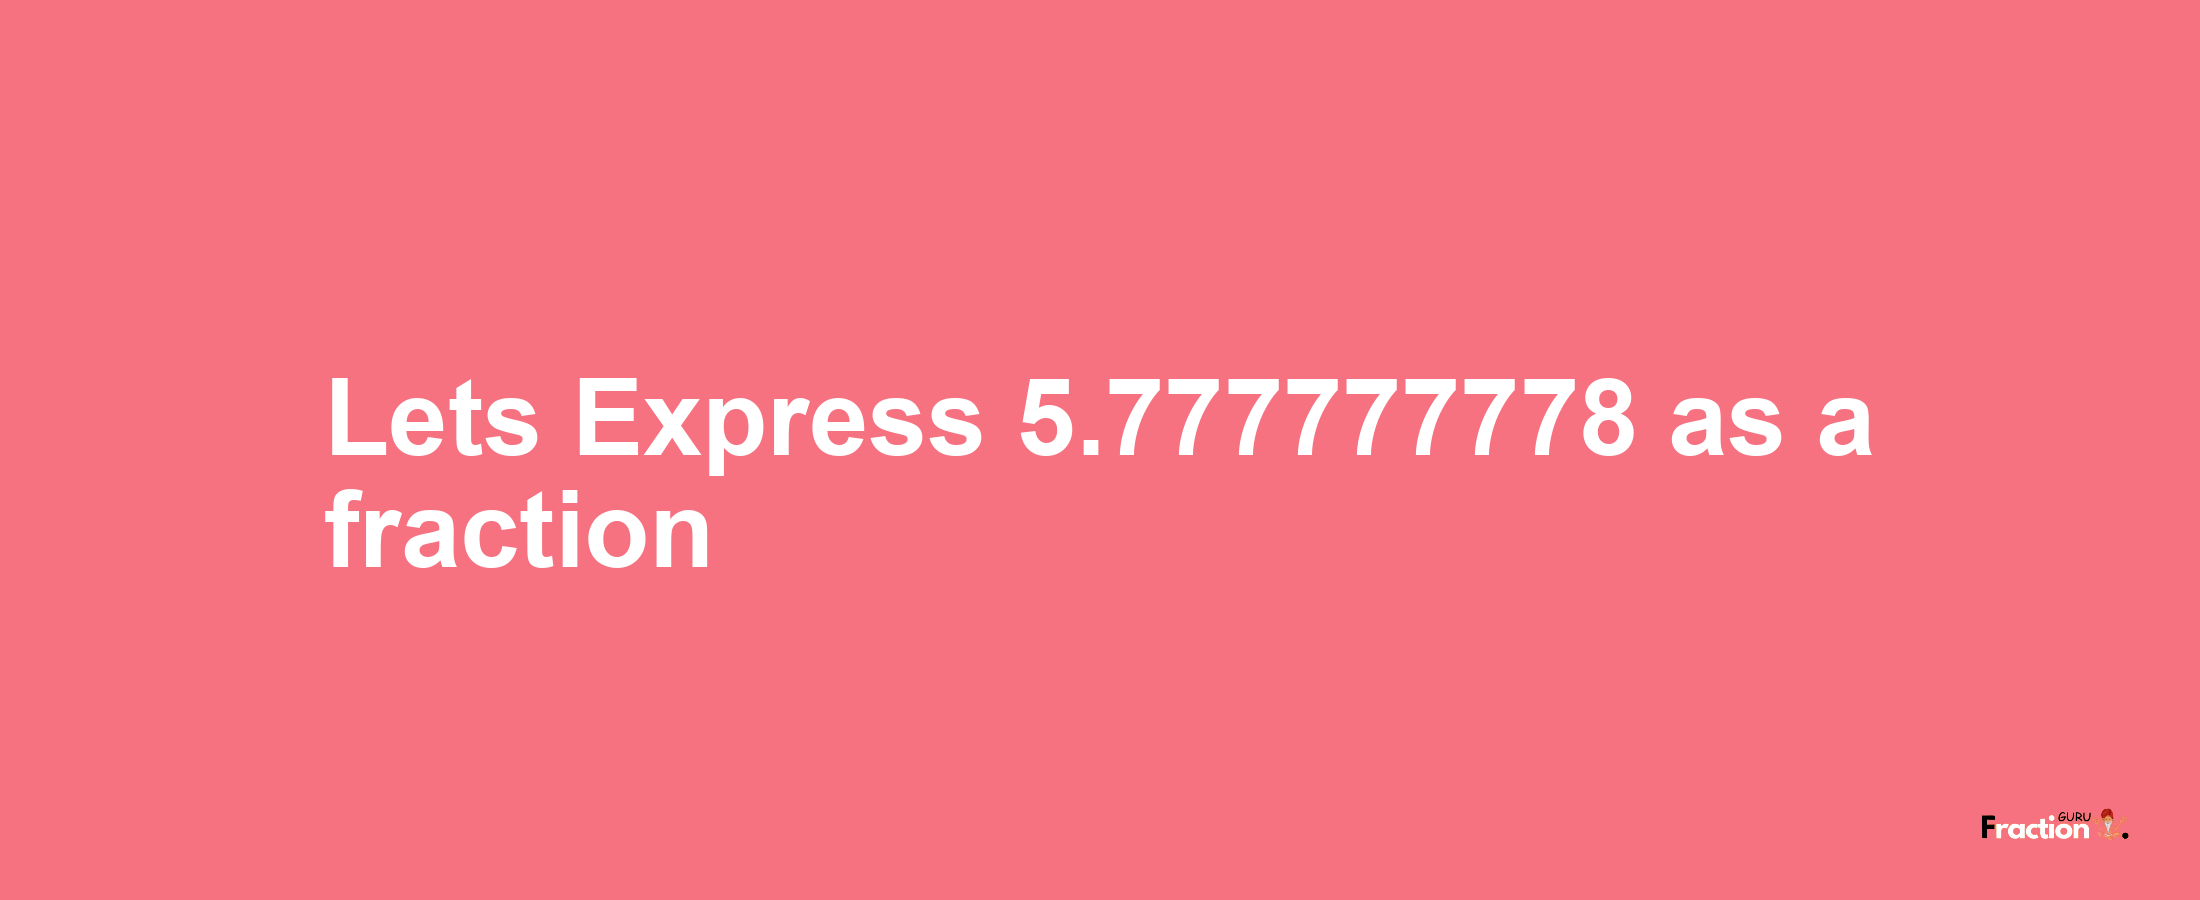 Lets Express 5.777777778 as afraction